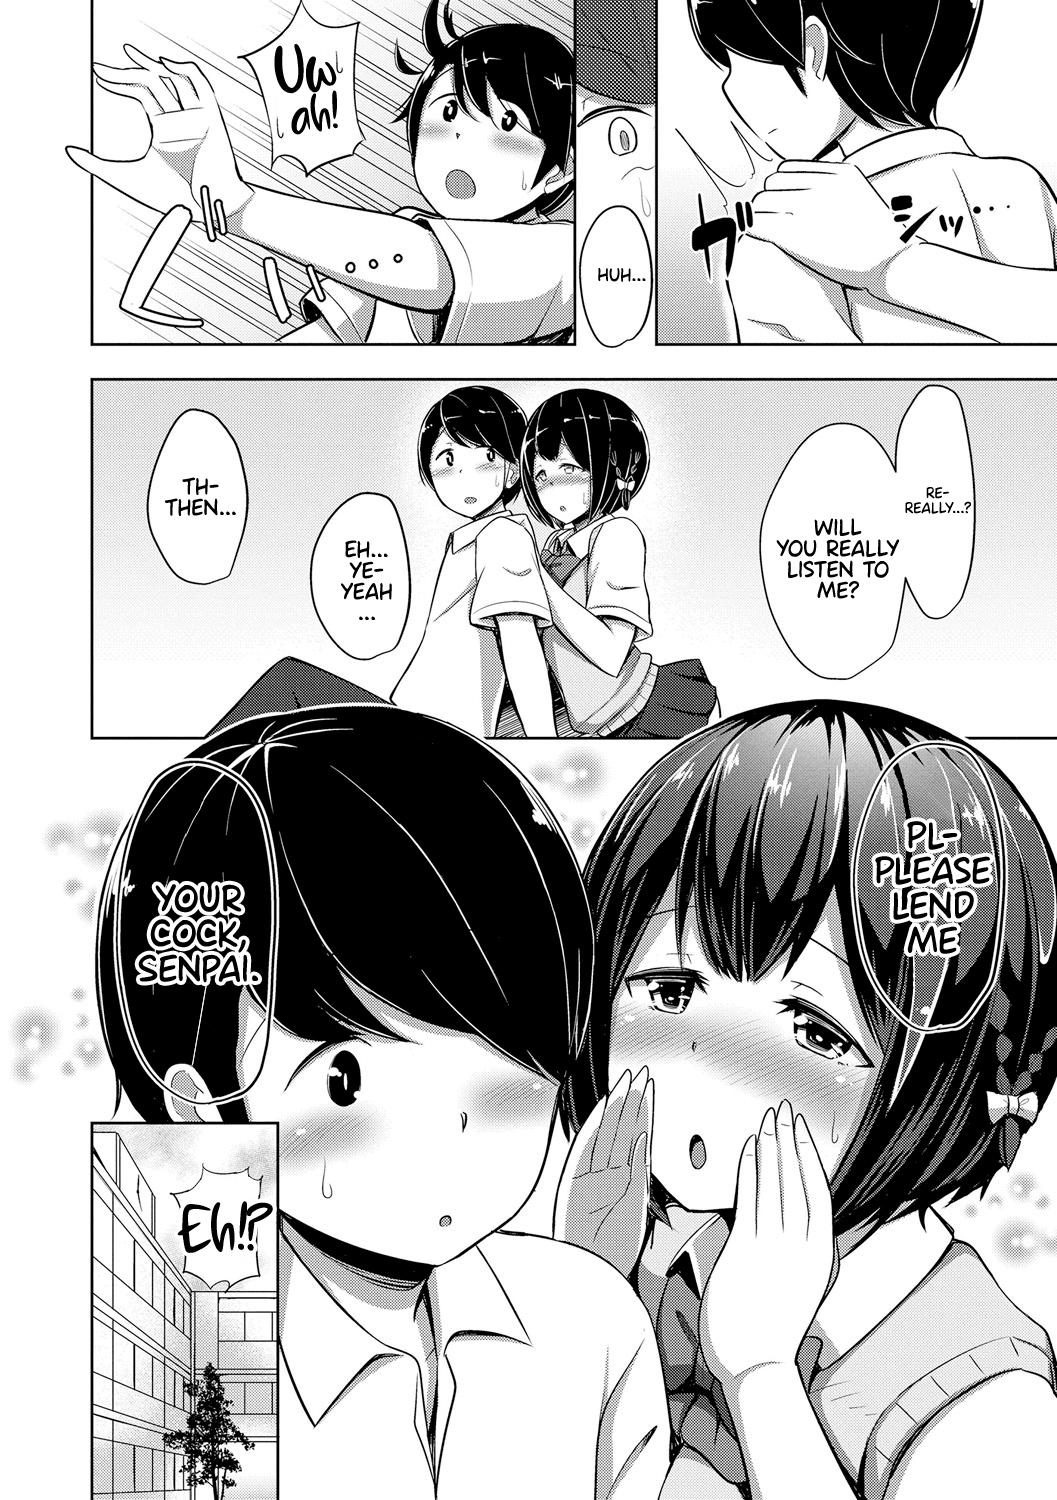 Student Afterschool ♥ Onahole~ Hardcoresex - Page 2